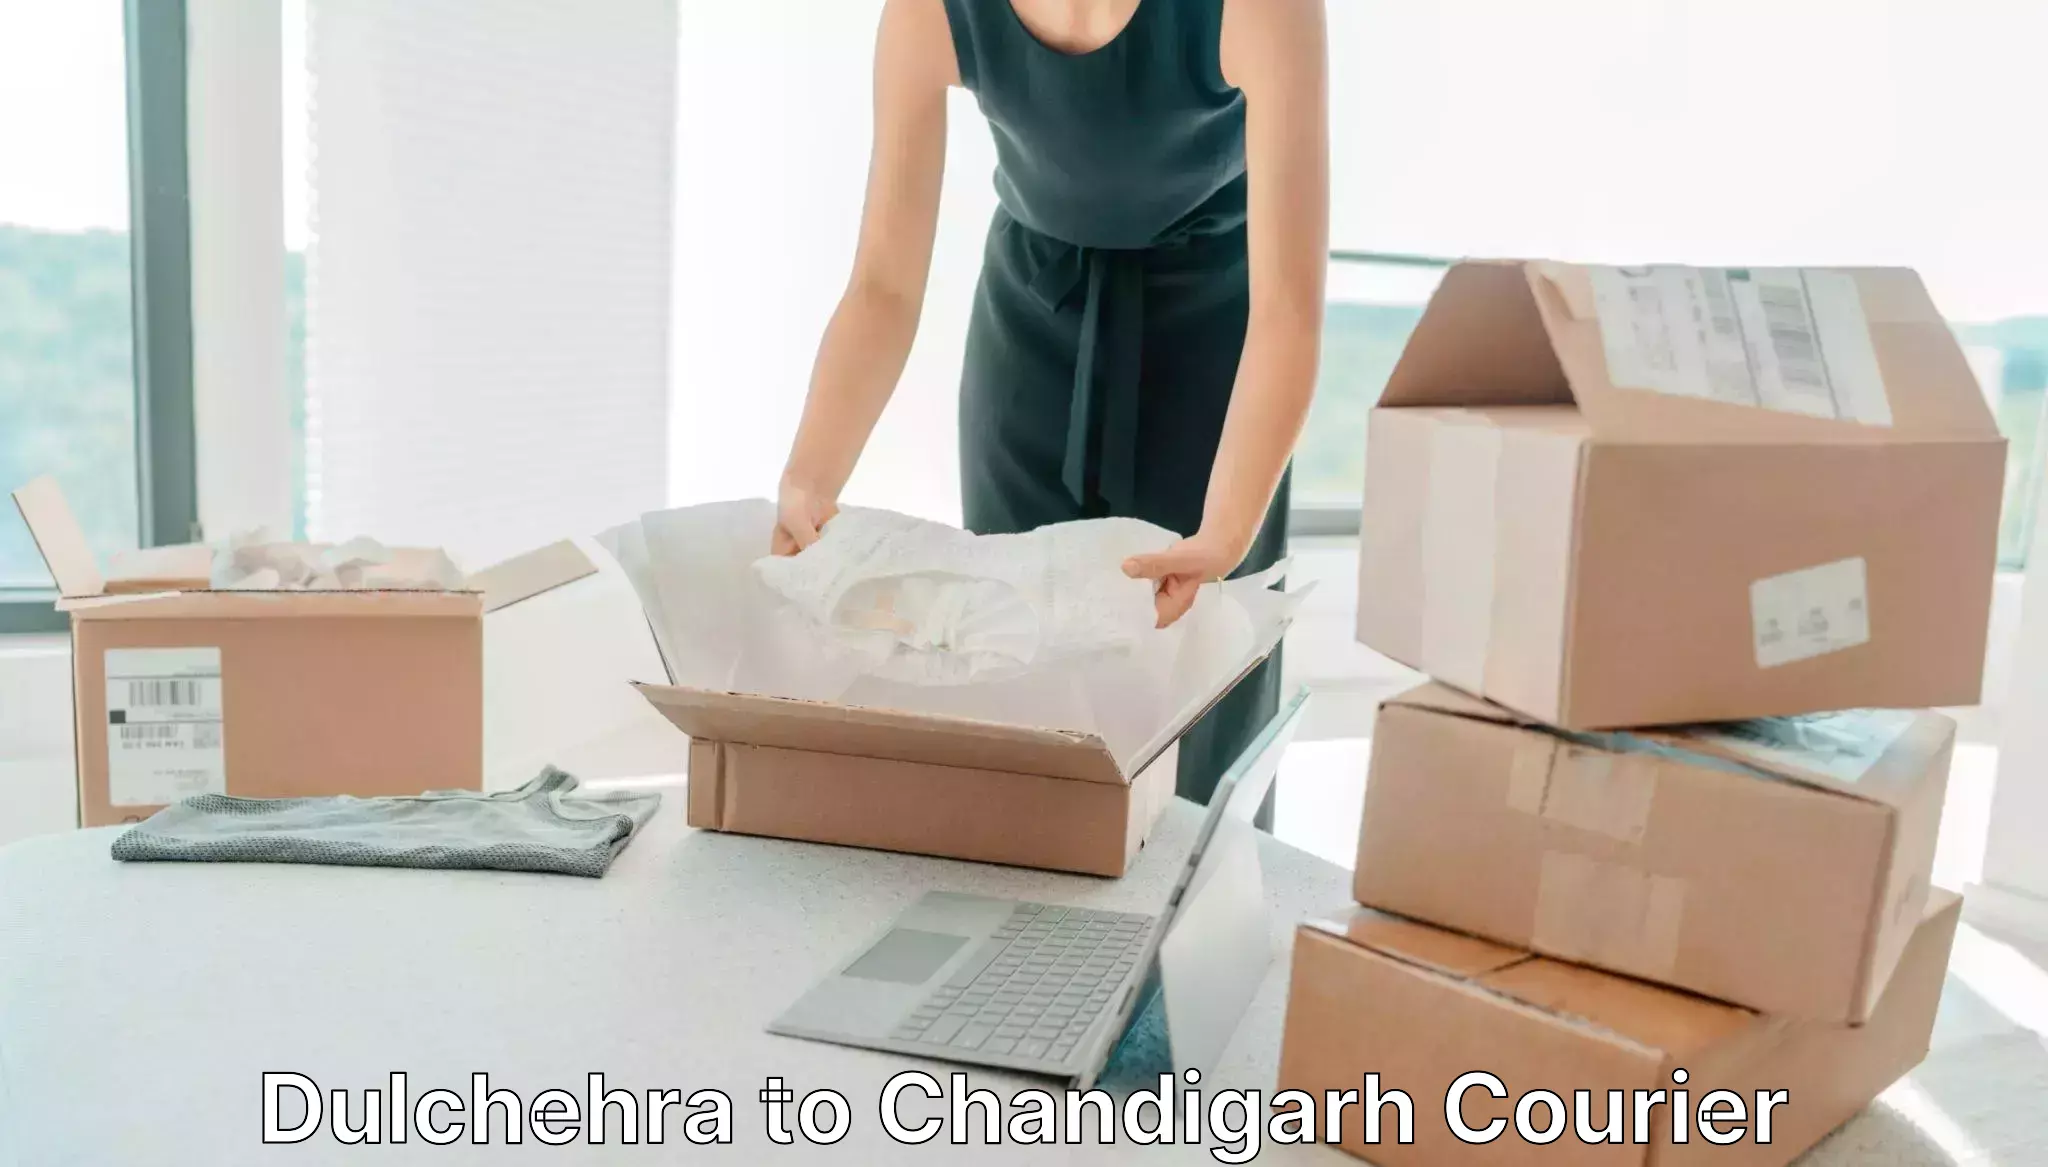 Tailored delivery services Dulchehra to Chandigarh